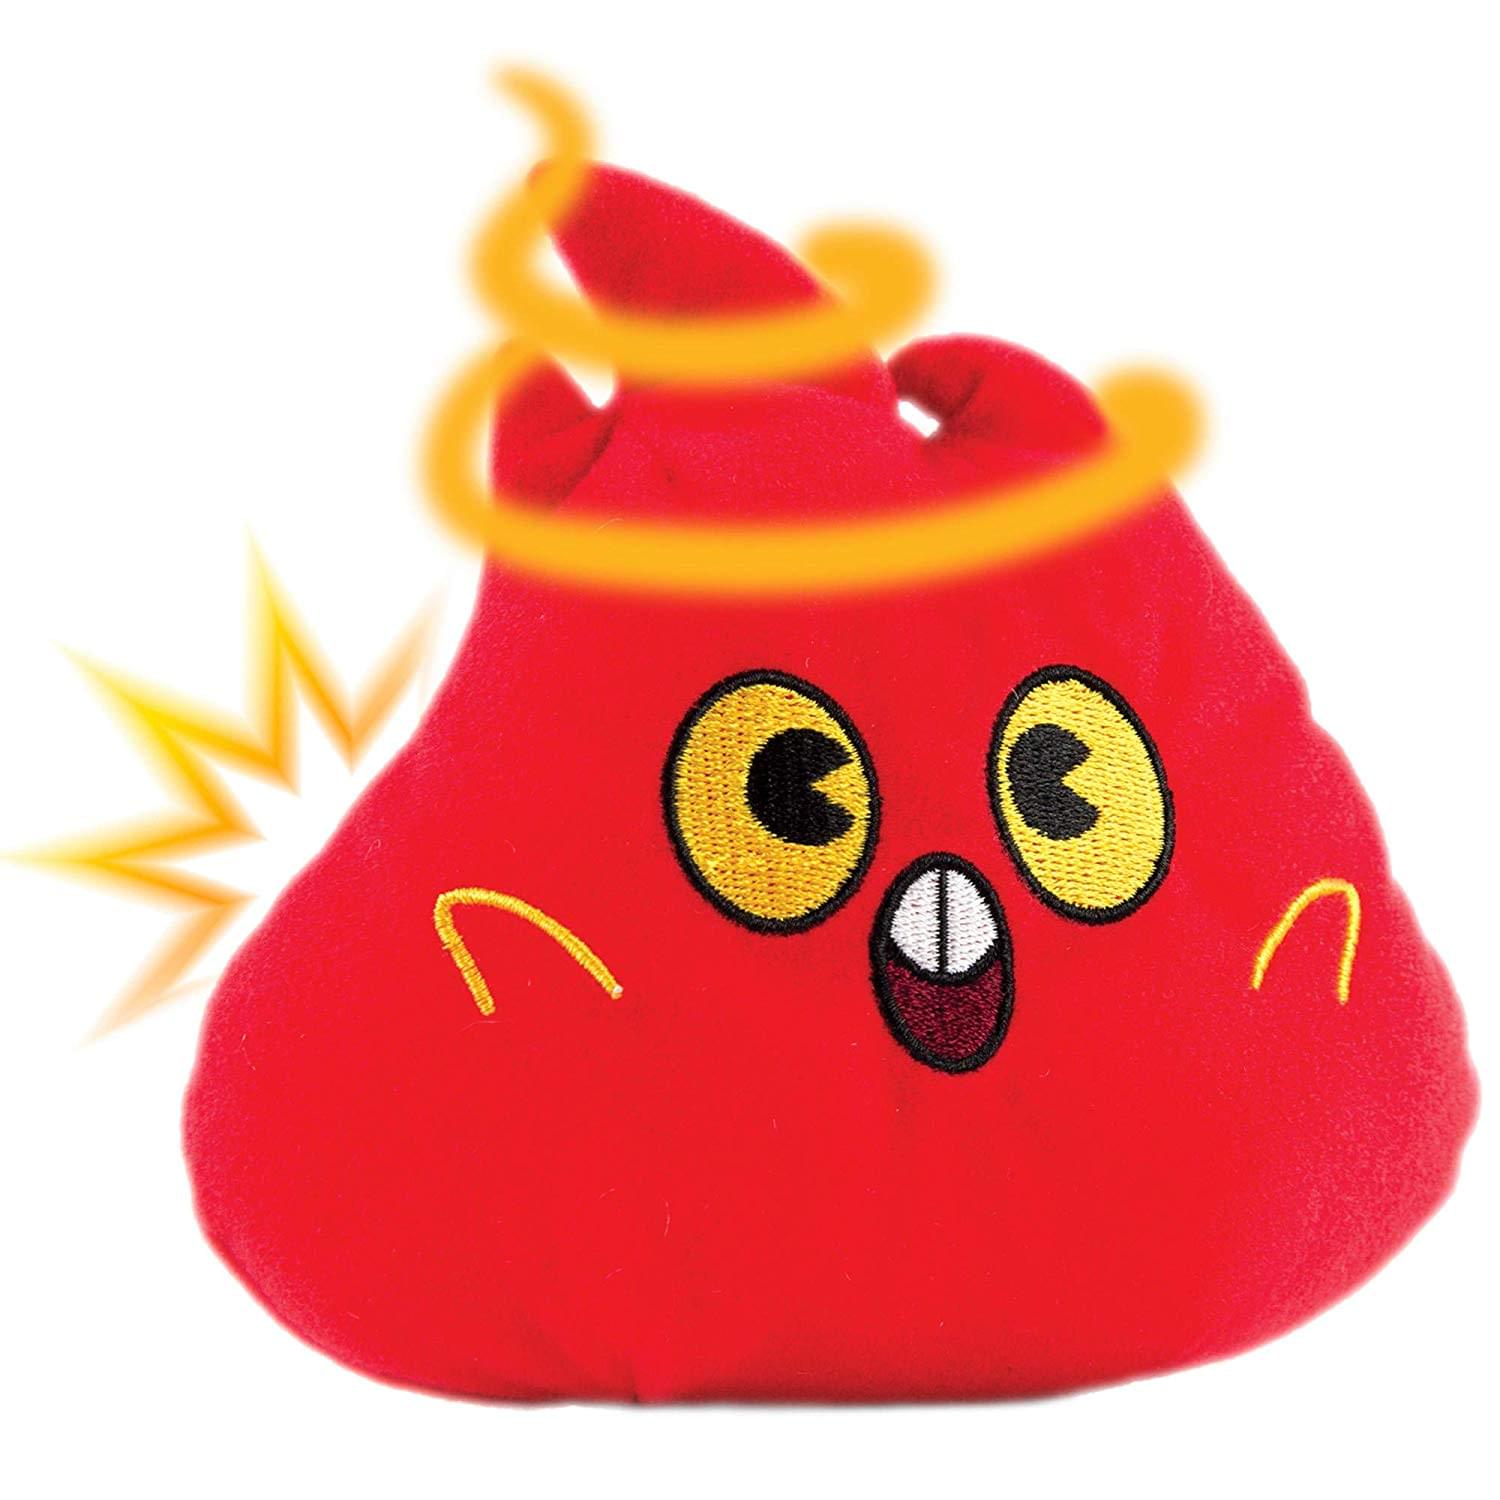 Stink Bomz 5 Inch Scented Plush - Spicy